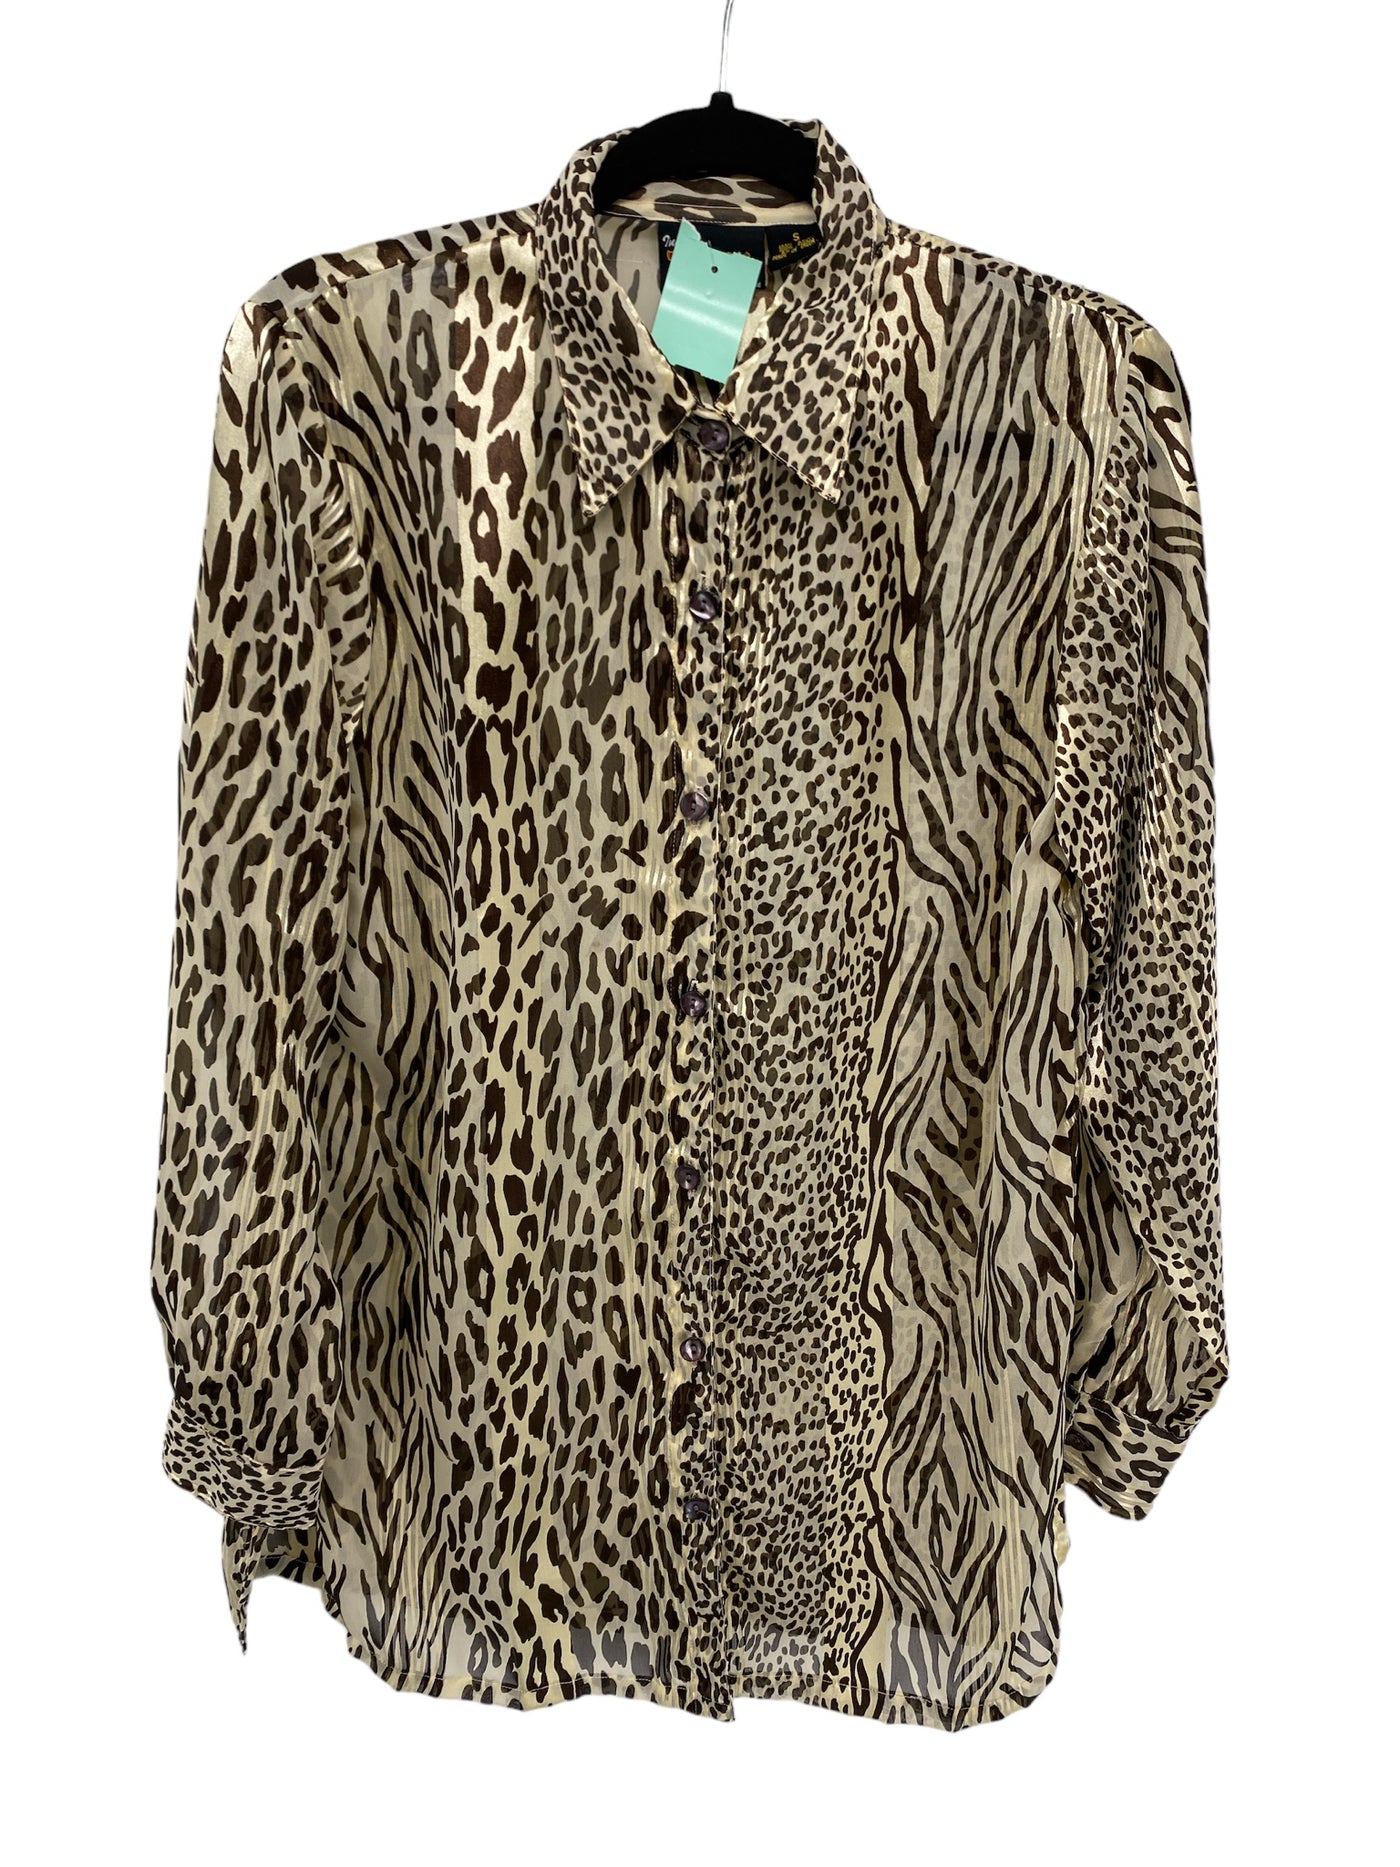 It's SO You Boutique Misses Size Small Animal Print LS Blouse